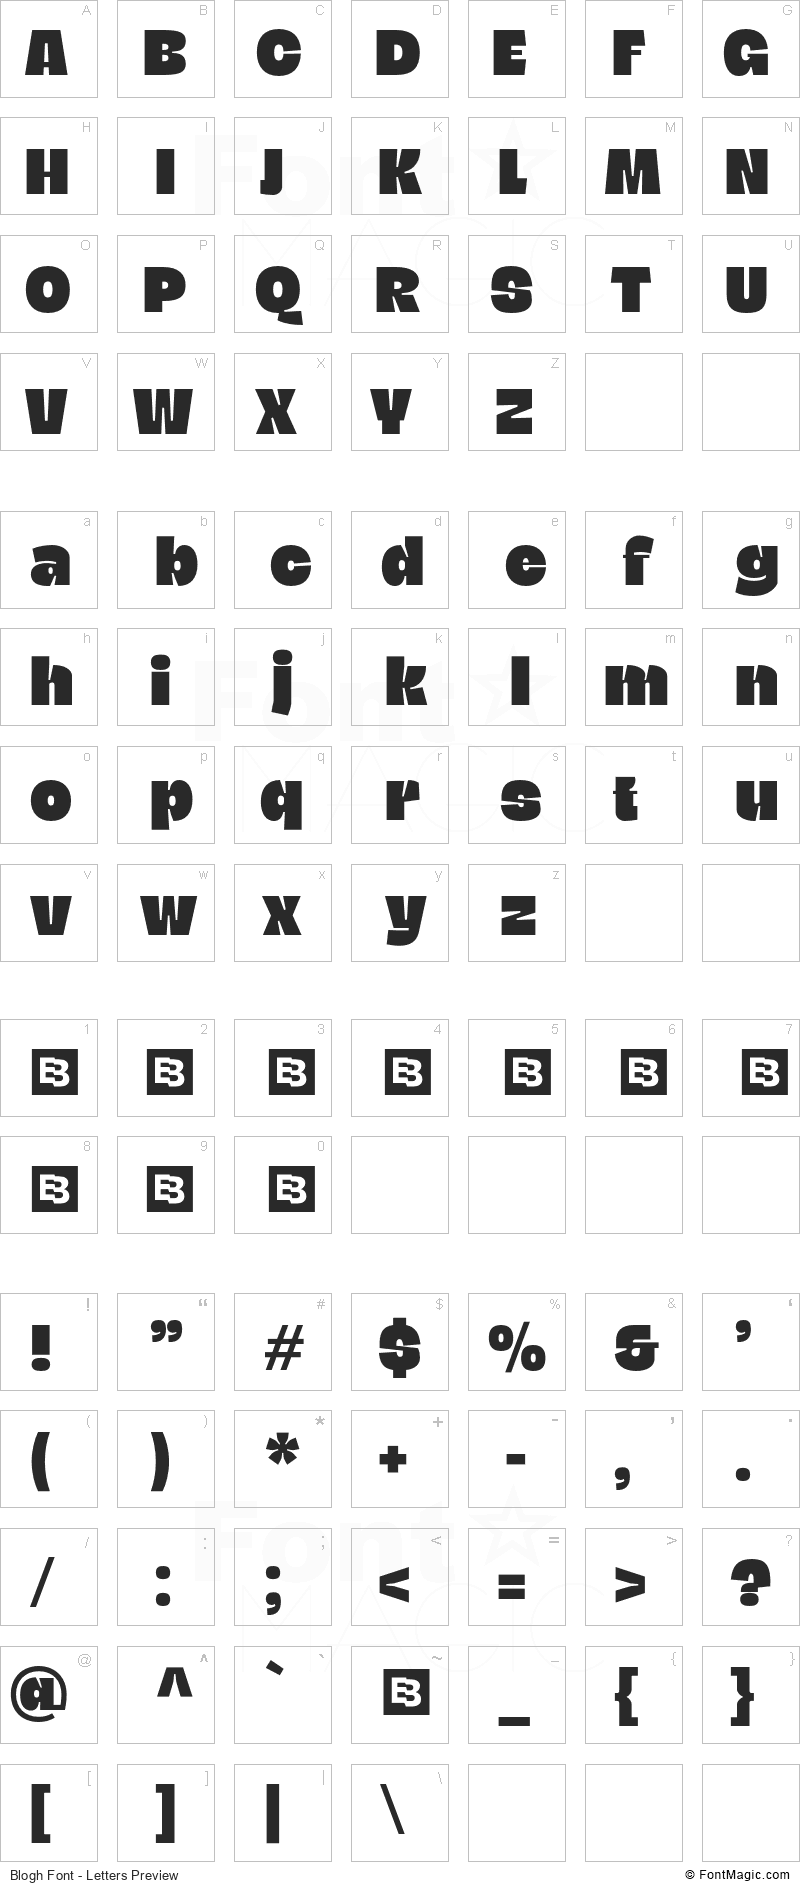 Blogh Font - All Latters Preview Chart